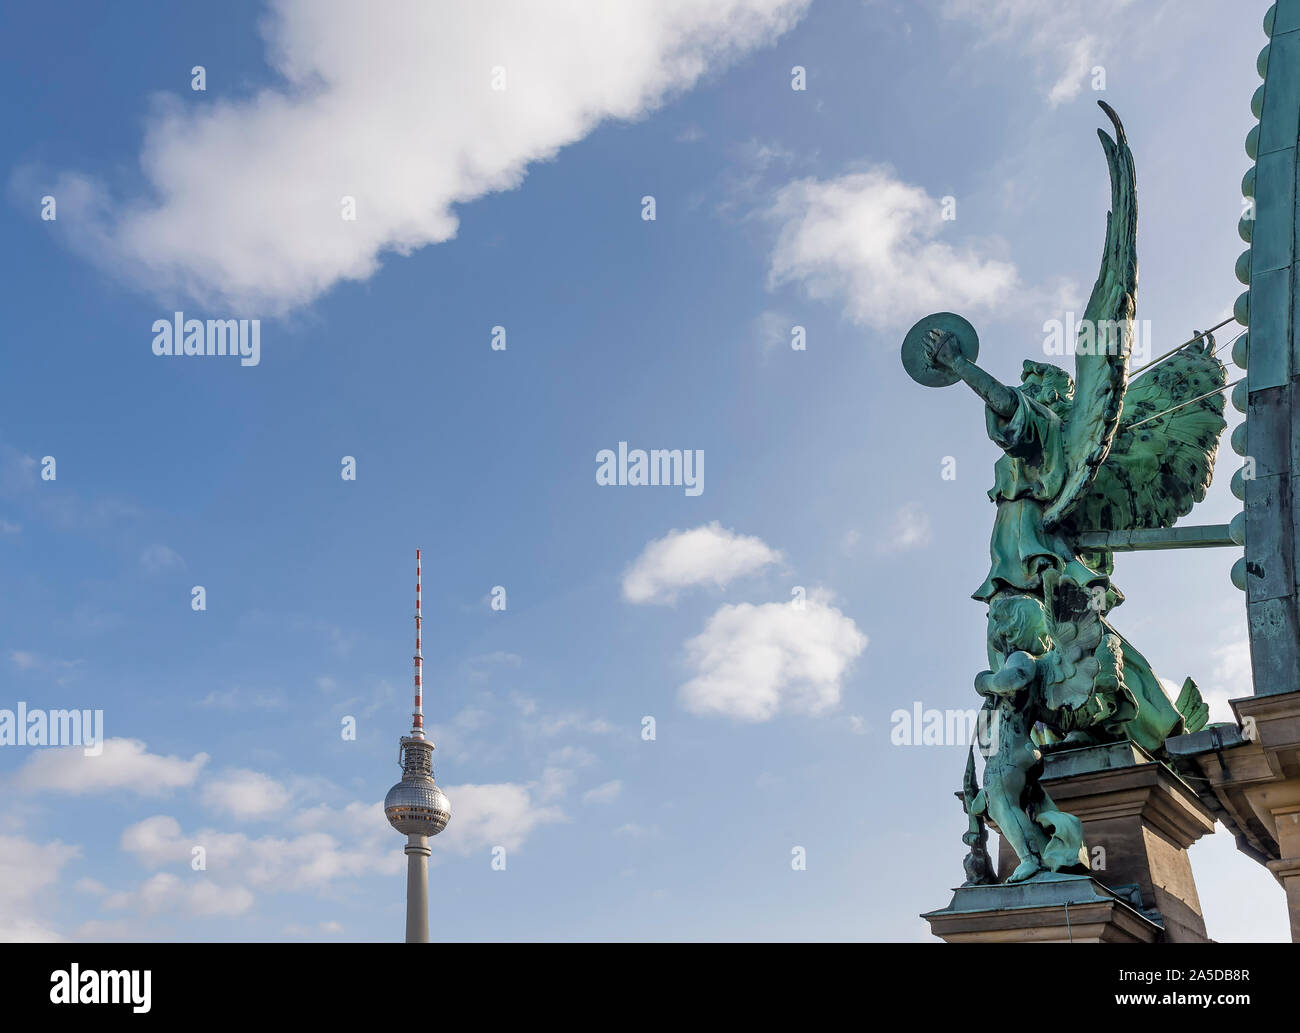 The angel of the dome of the Cathedral of Berlin, Germany and the Television Tower against a beautiful blue sky with some clouds Stock Photo